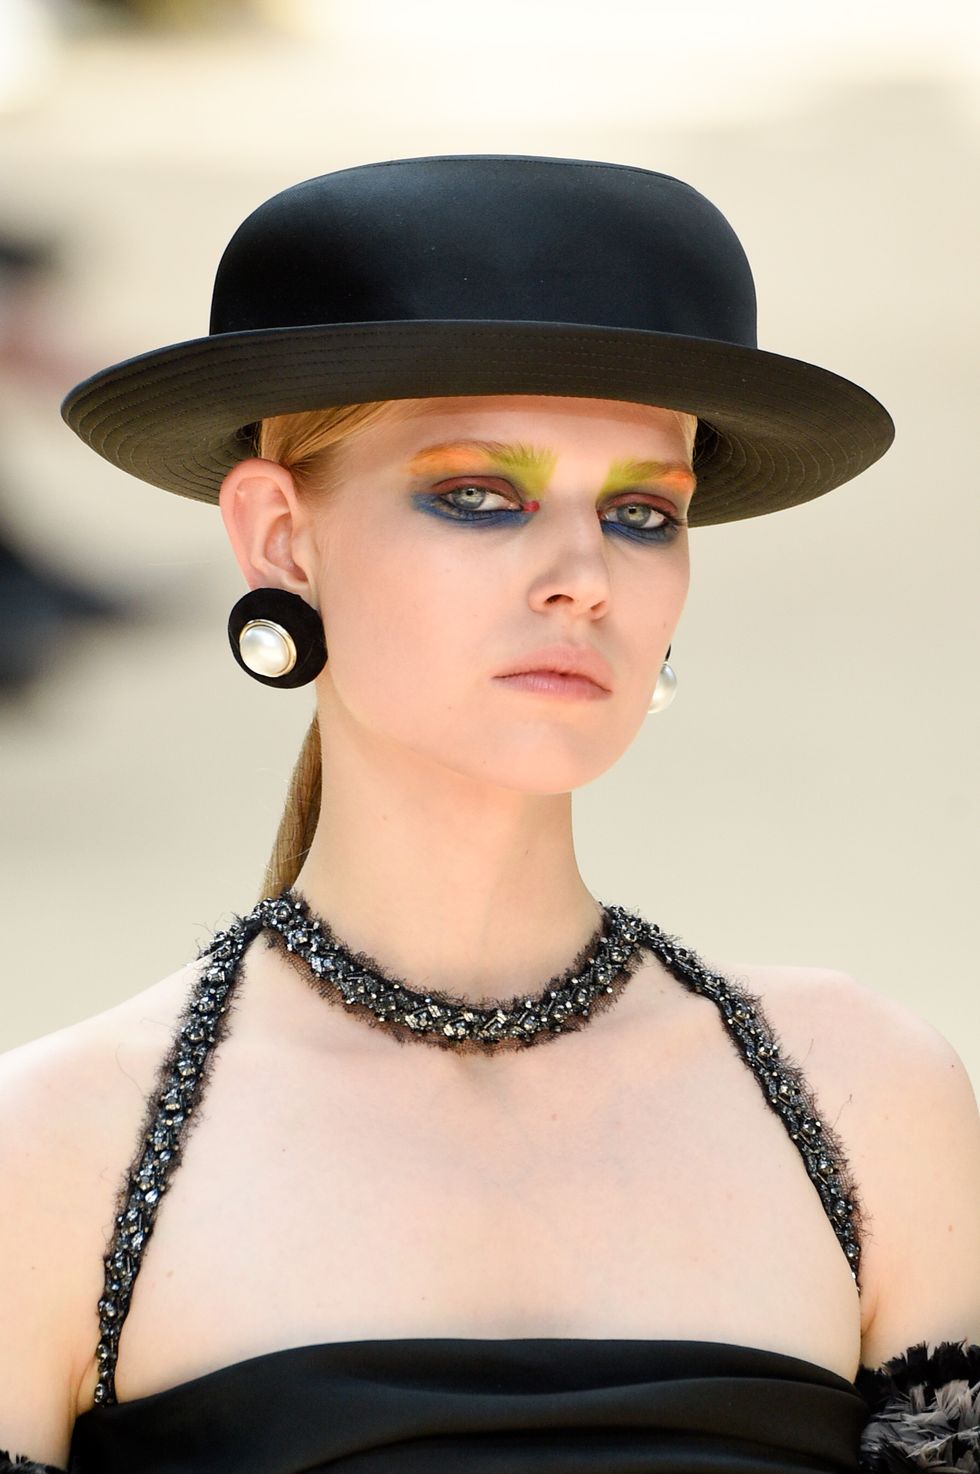 PARIS, FRANCE - JULY 04:  A model, hat detail, walks the runway during the Chanel Haute Couture Fall/Winter 2017-2018 show as part of Haute Couture Paris Fashion Week on July 4, 2017 in Paris, France.  (Photo by Peter White/Getty Images)